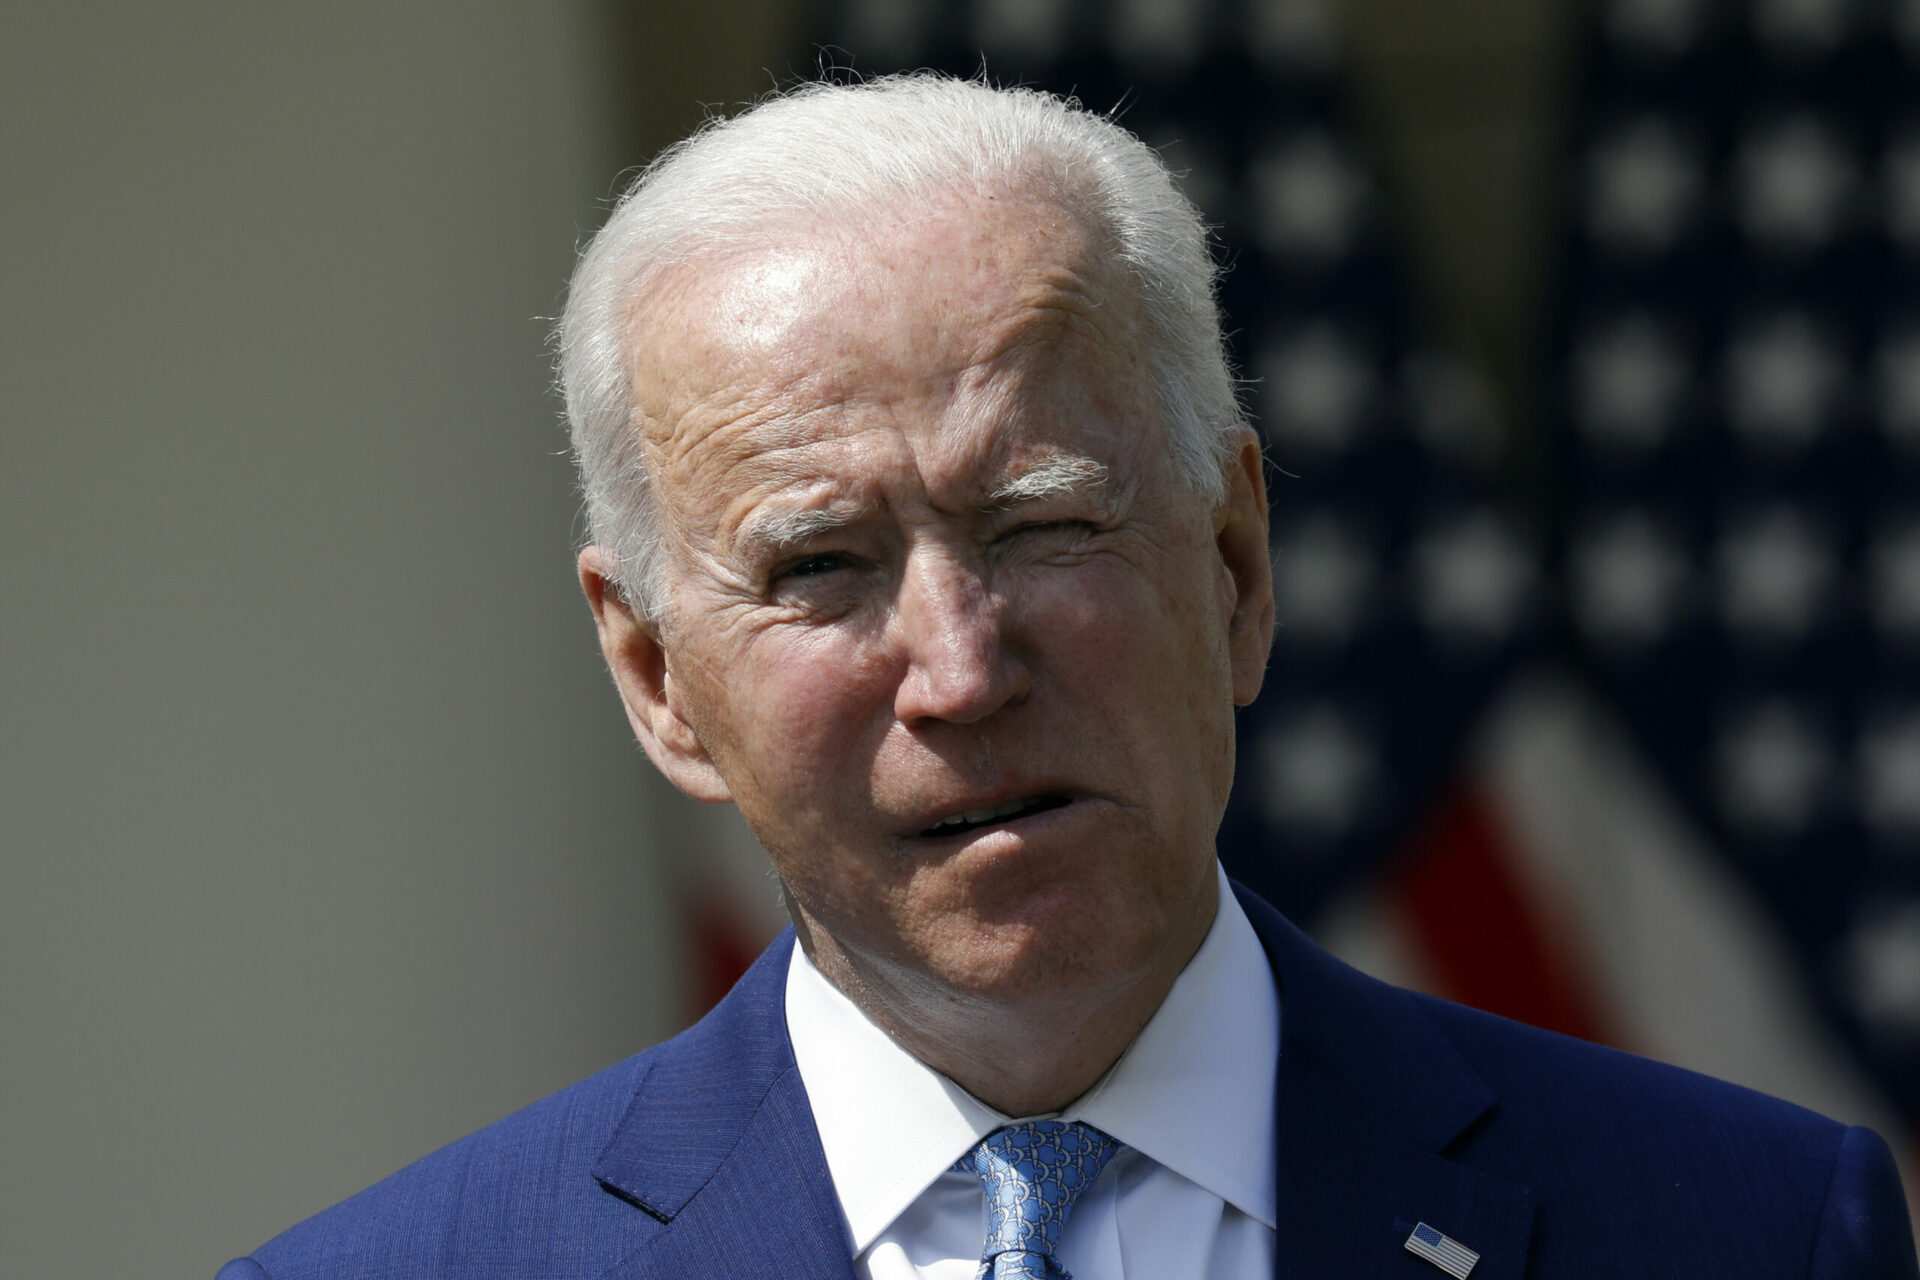 Trump leads Biden with swing state voters, survey shows